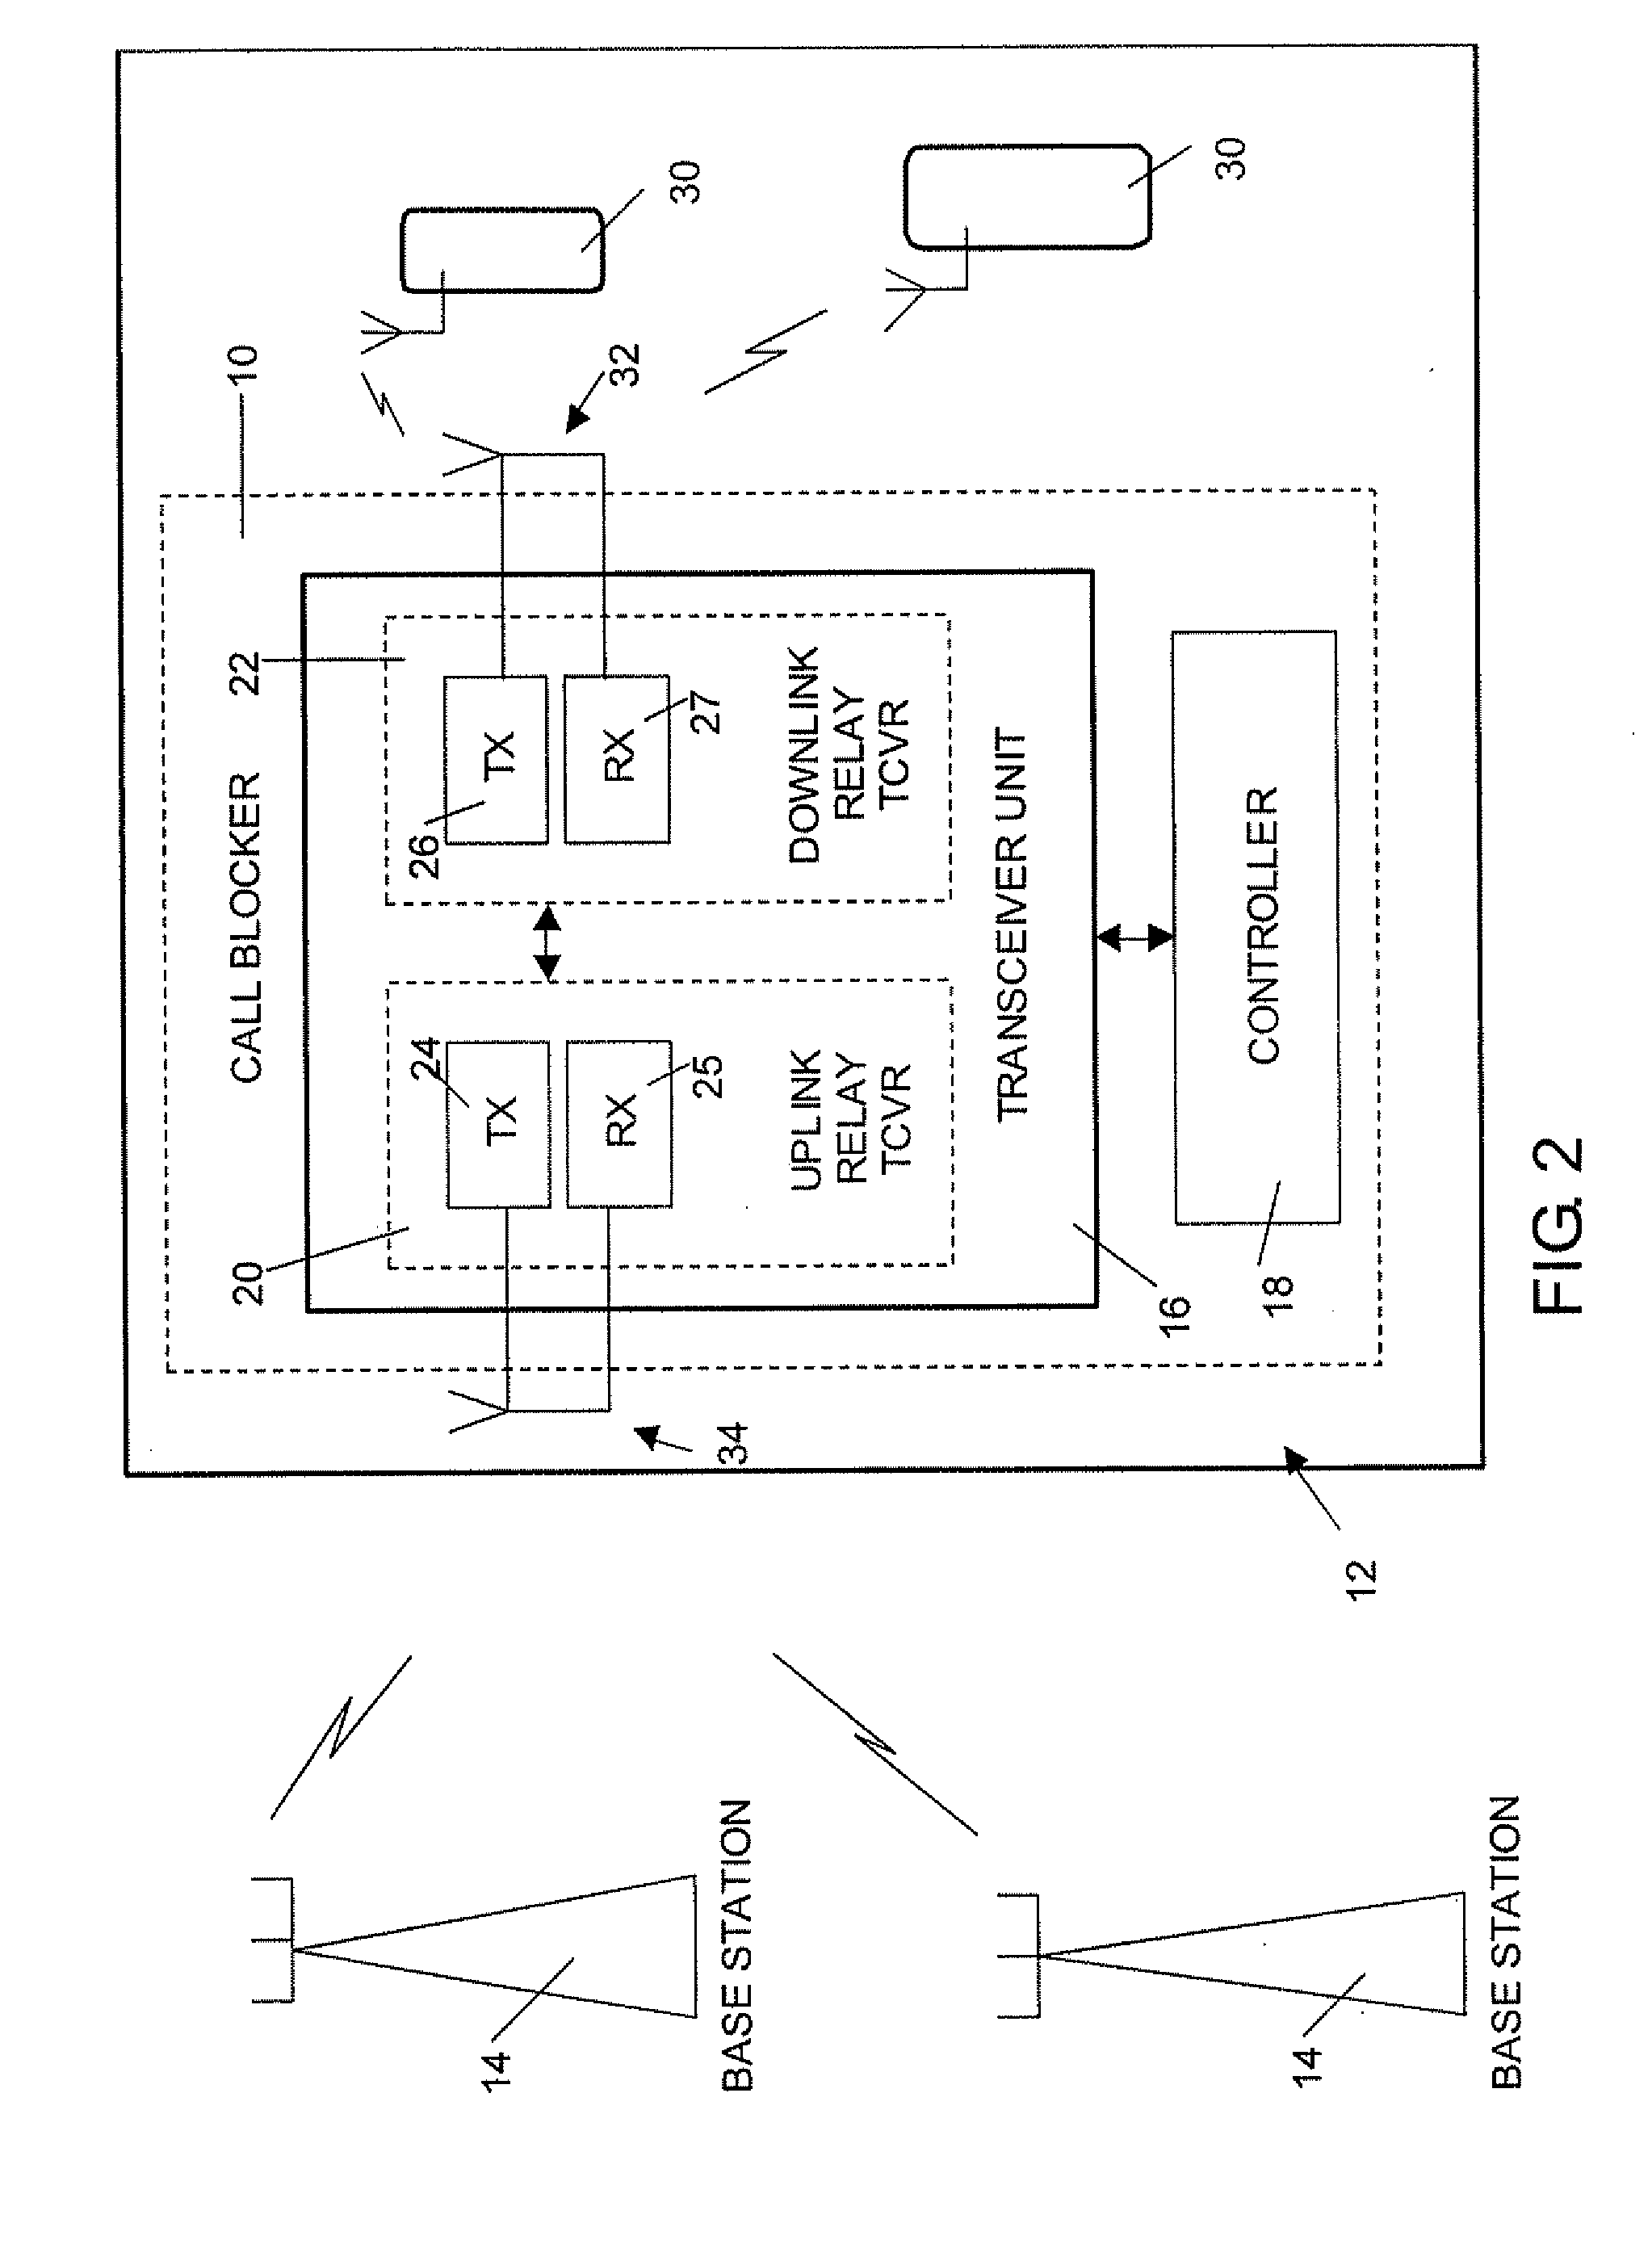 Intelligent asymmetric service denial system for mobile cellular devices and associated methods